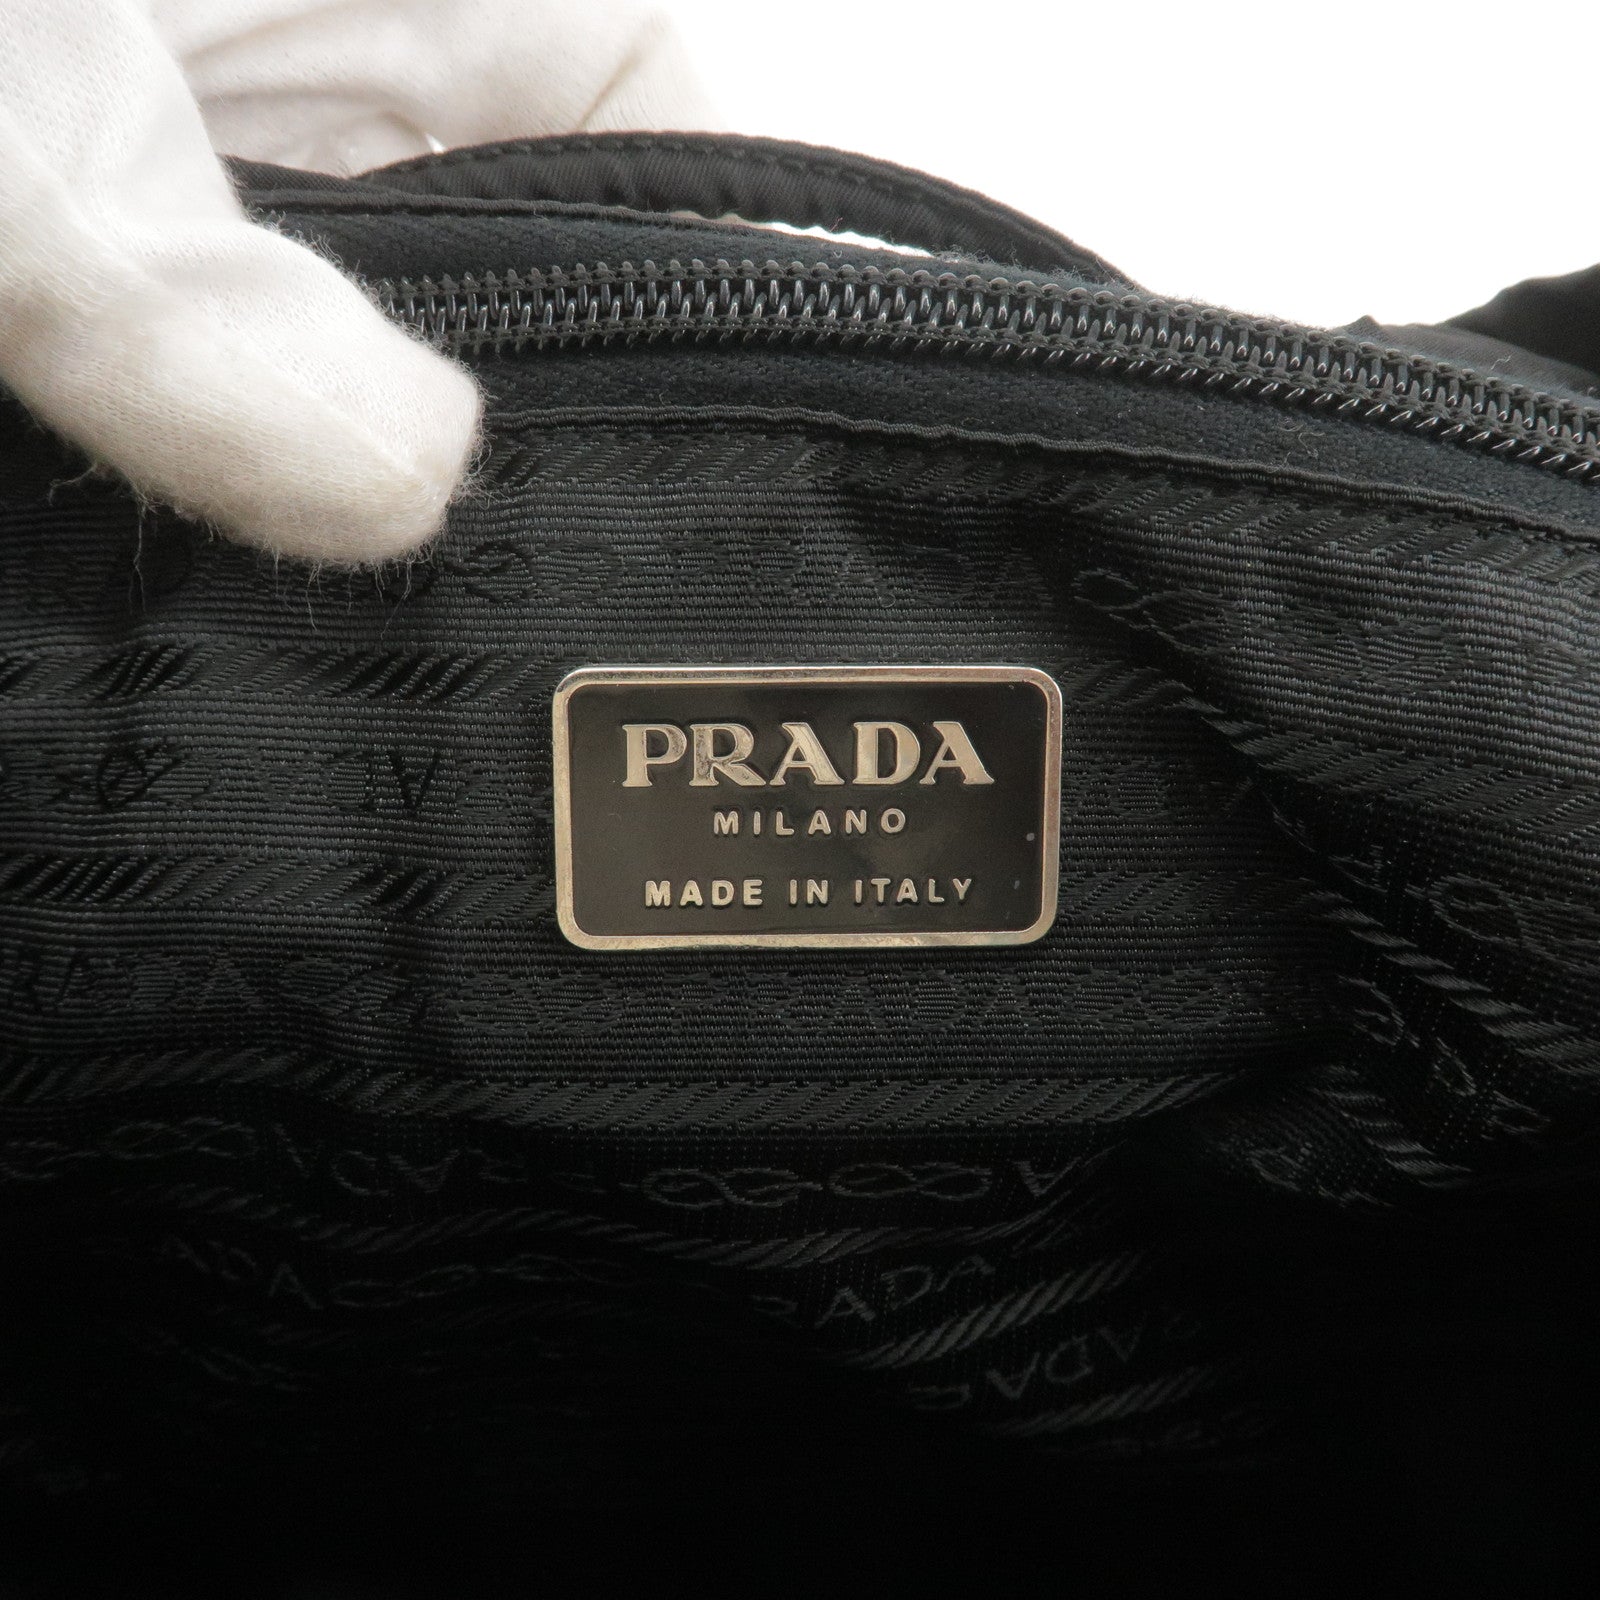 Prada Bags Are Making A Come Back